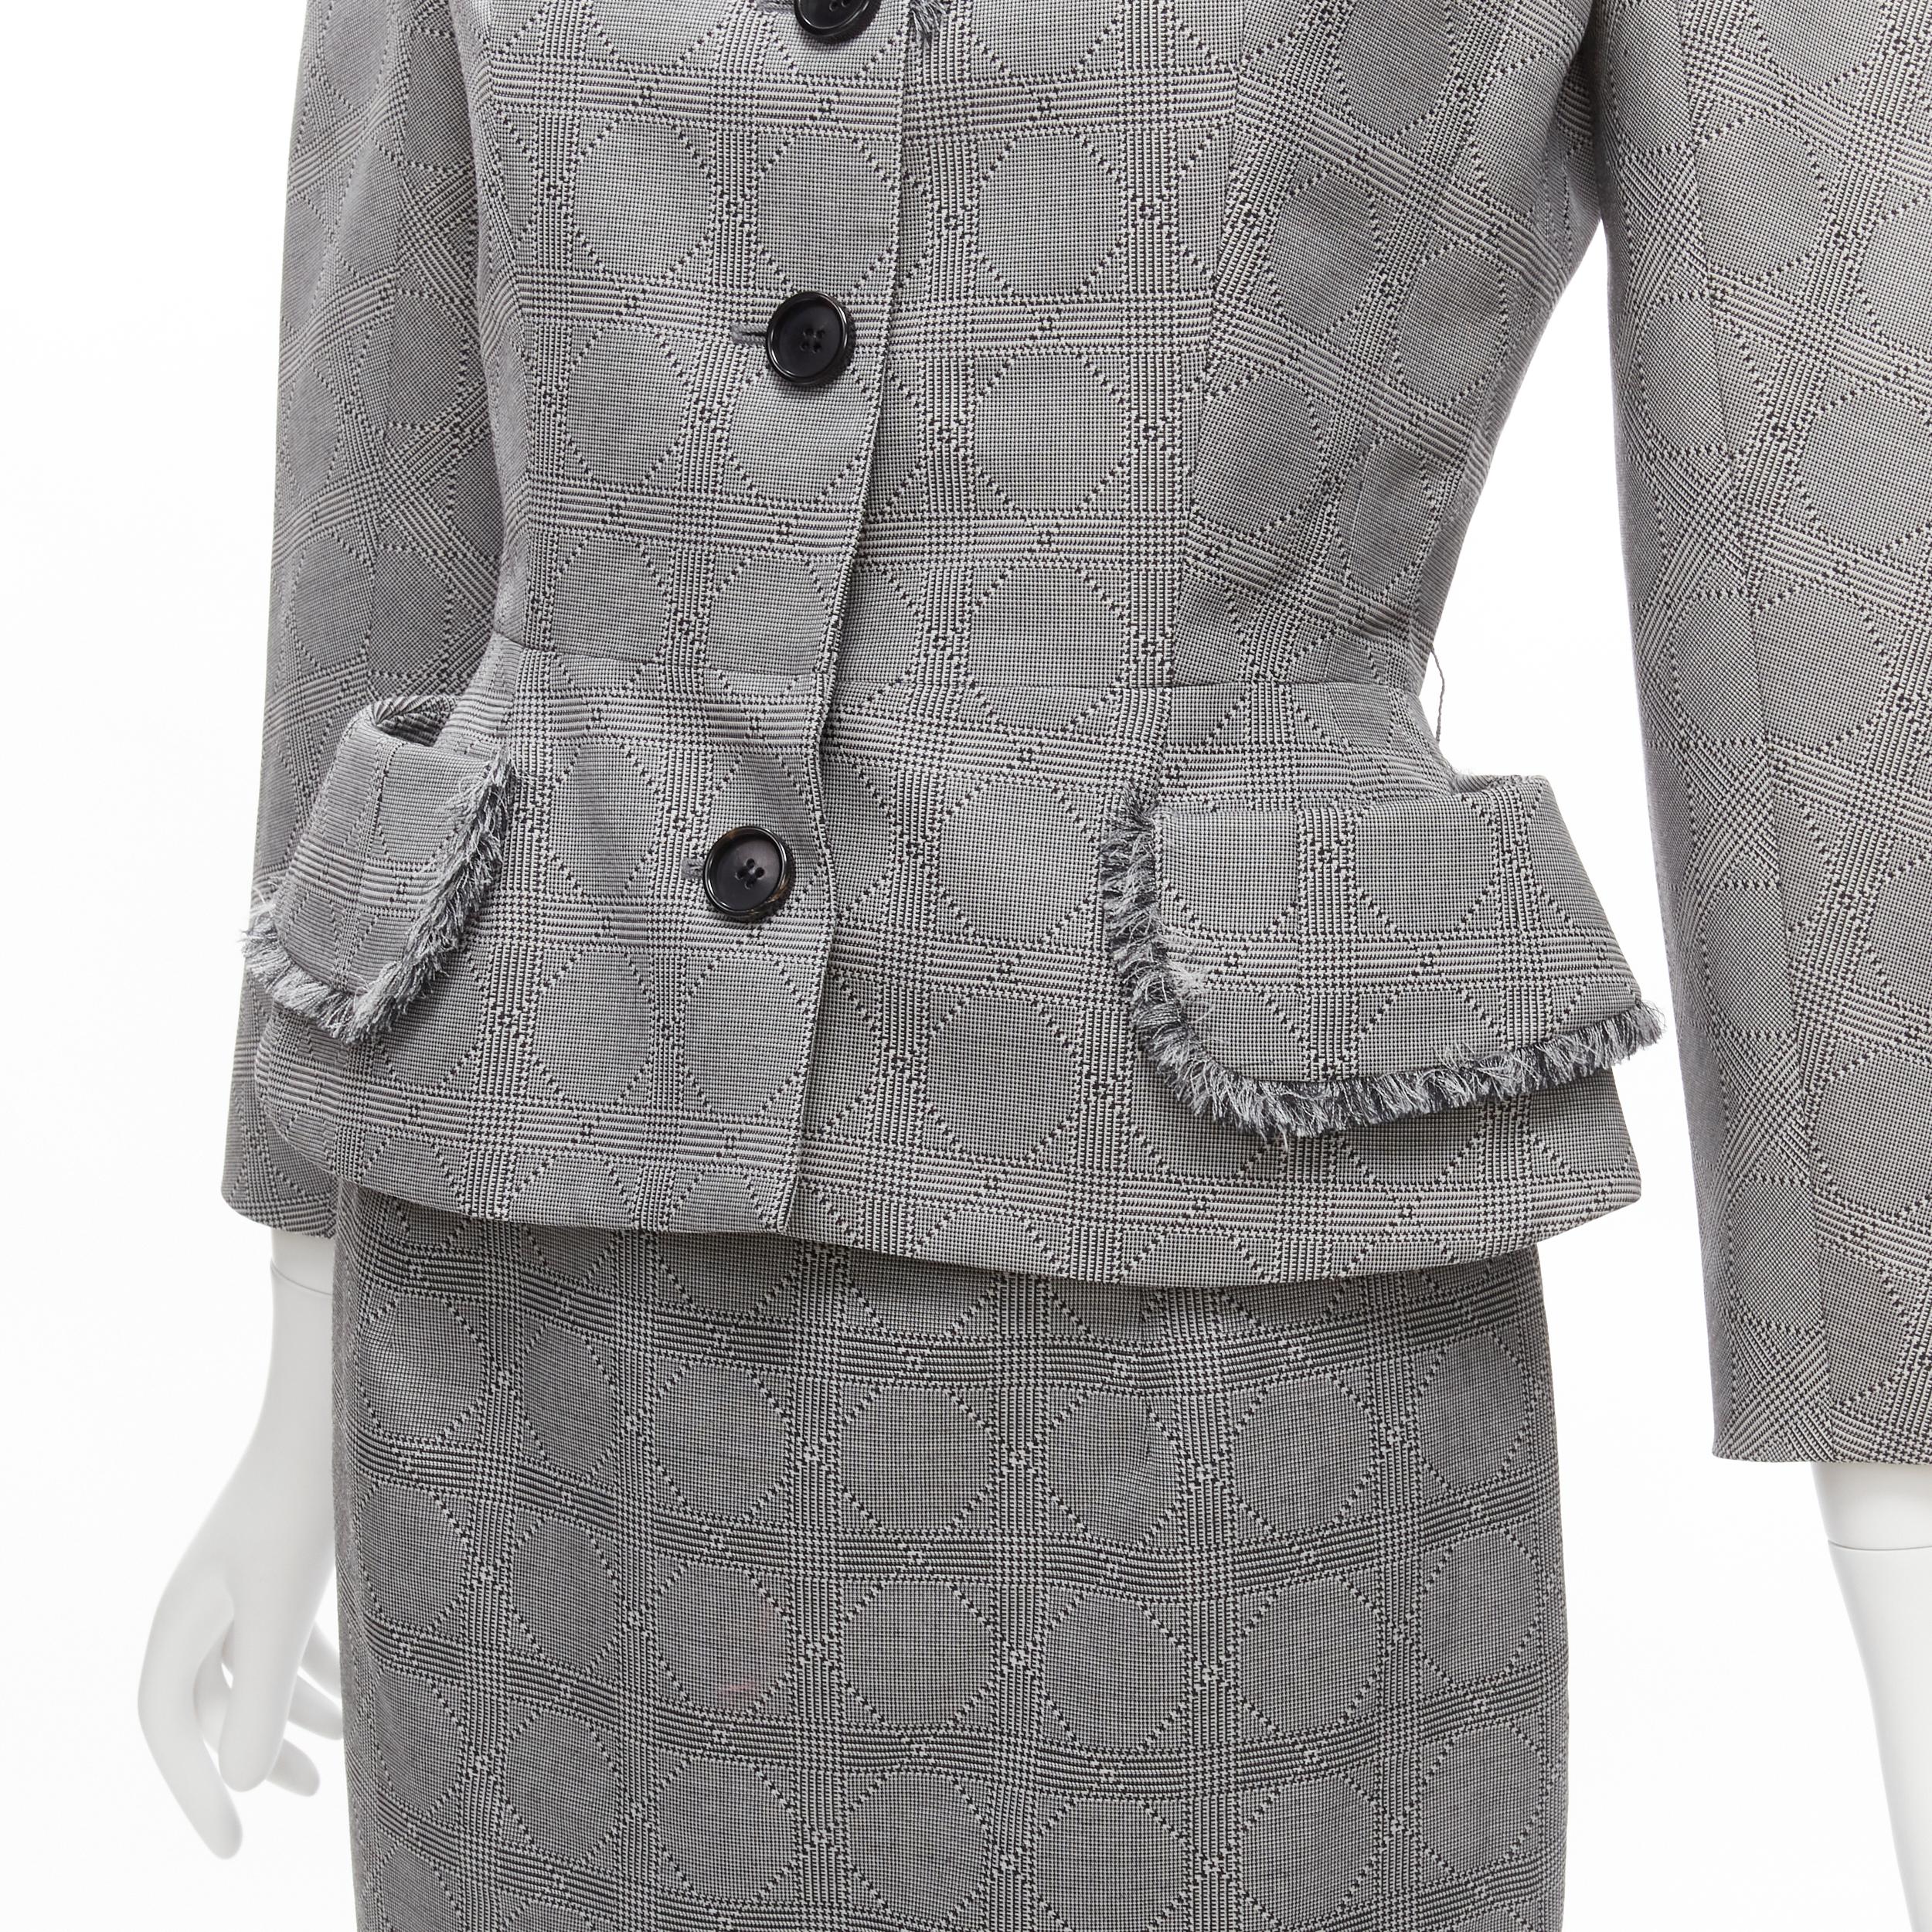 CHRISTIAN DIOR John Galliano Vintage grey houndstooth check bar jacket blazer skirt FR36 S
Reference: TGAS/D00298
Brand: Christian Dior
Designer: John Galliano
Material: Wool, Silk
Color: Grey, White
Pattern: Houndstooth
Closure: Button
Lining: